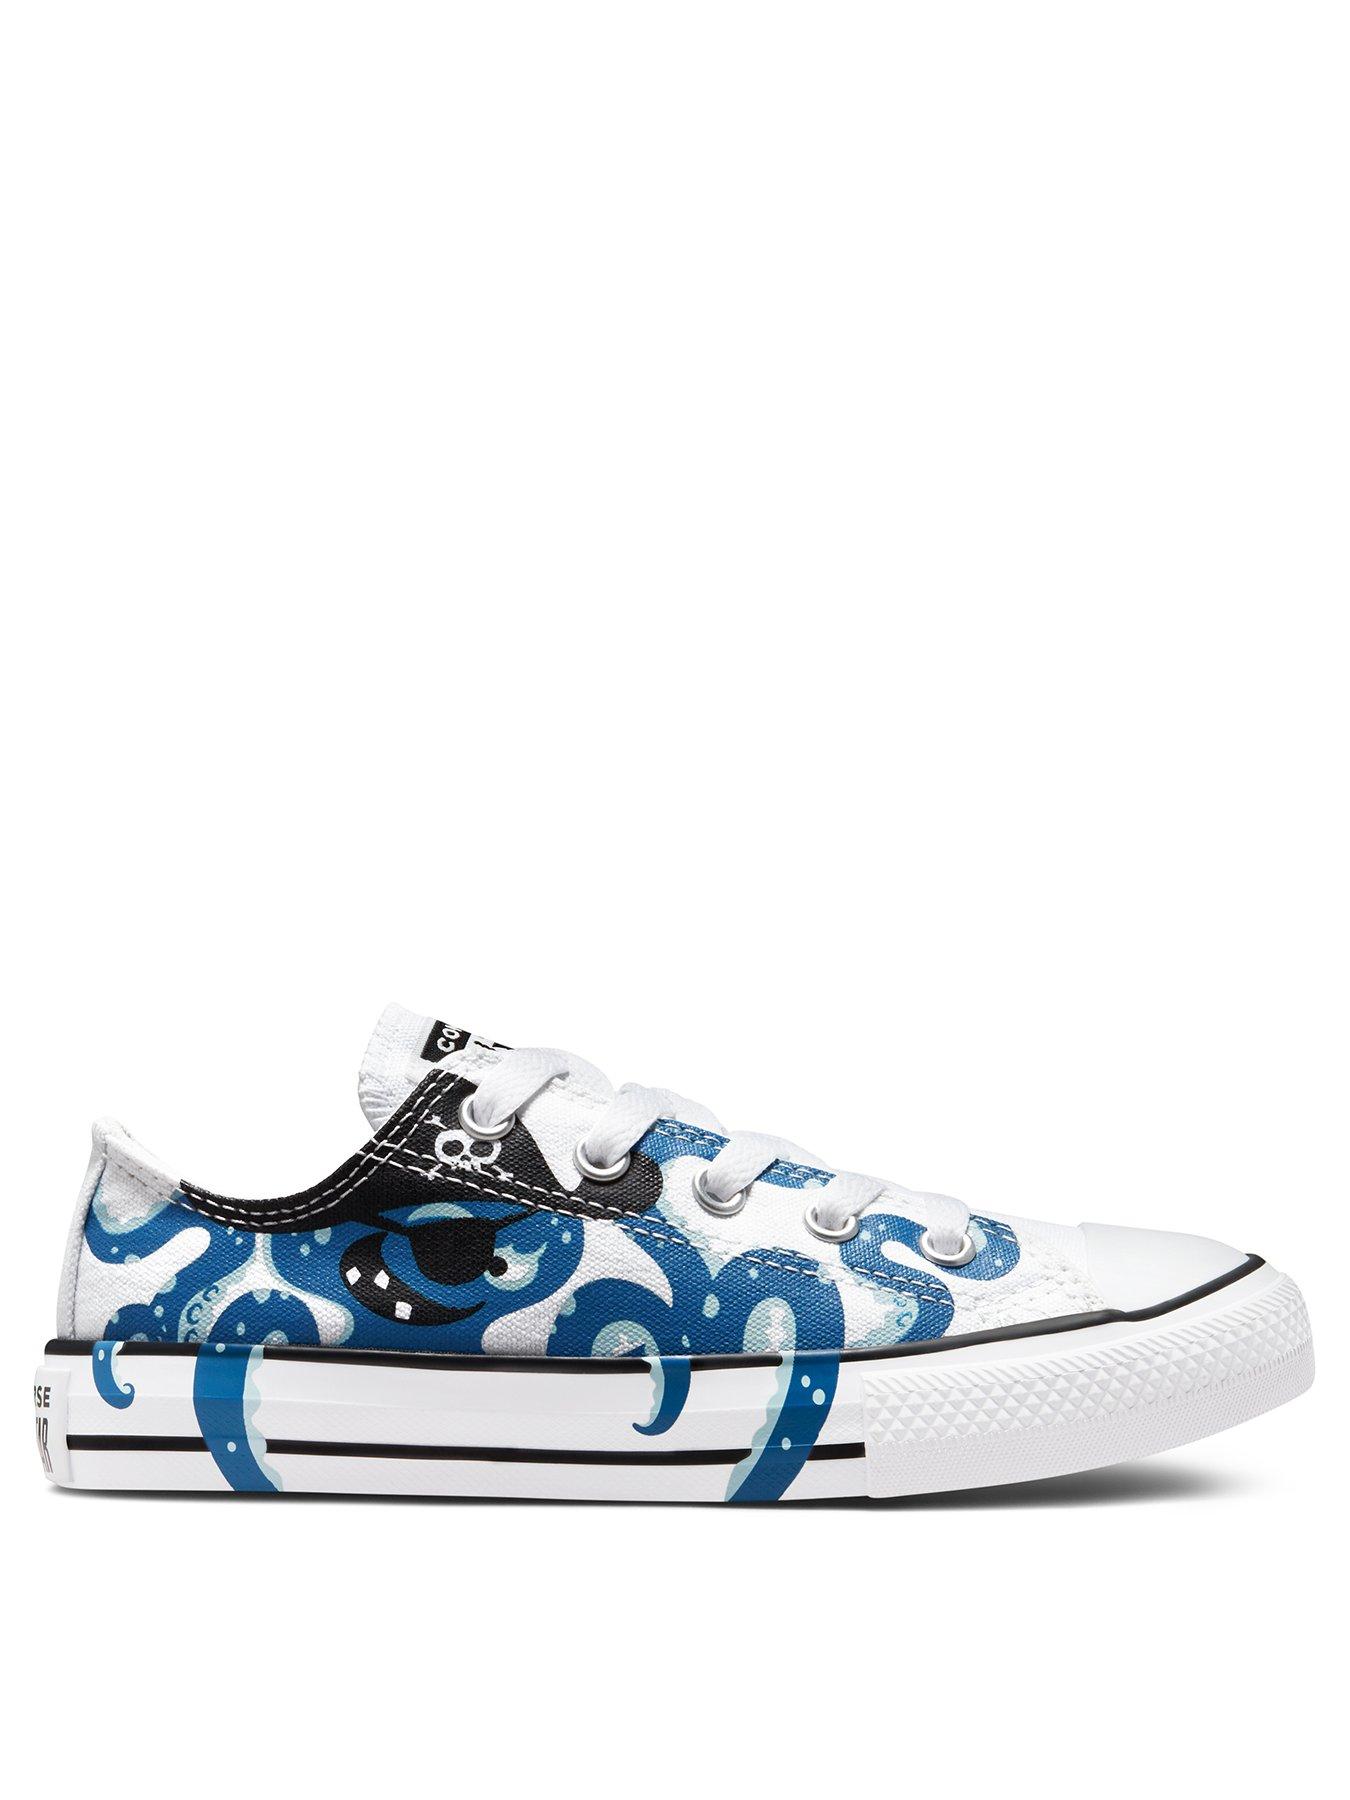 Trainers Chuck Taylor All Star Ox Childrens Boys Octopirate Print Trainers -White/Multi